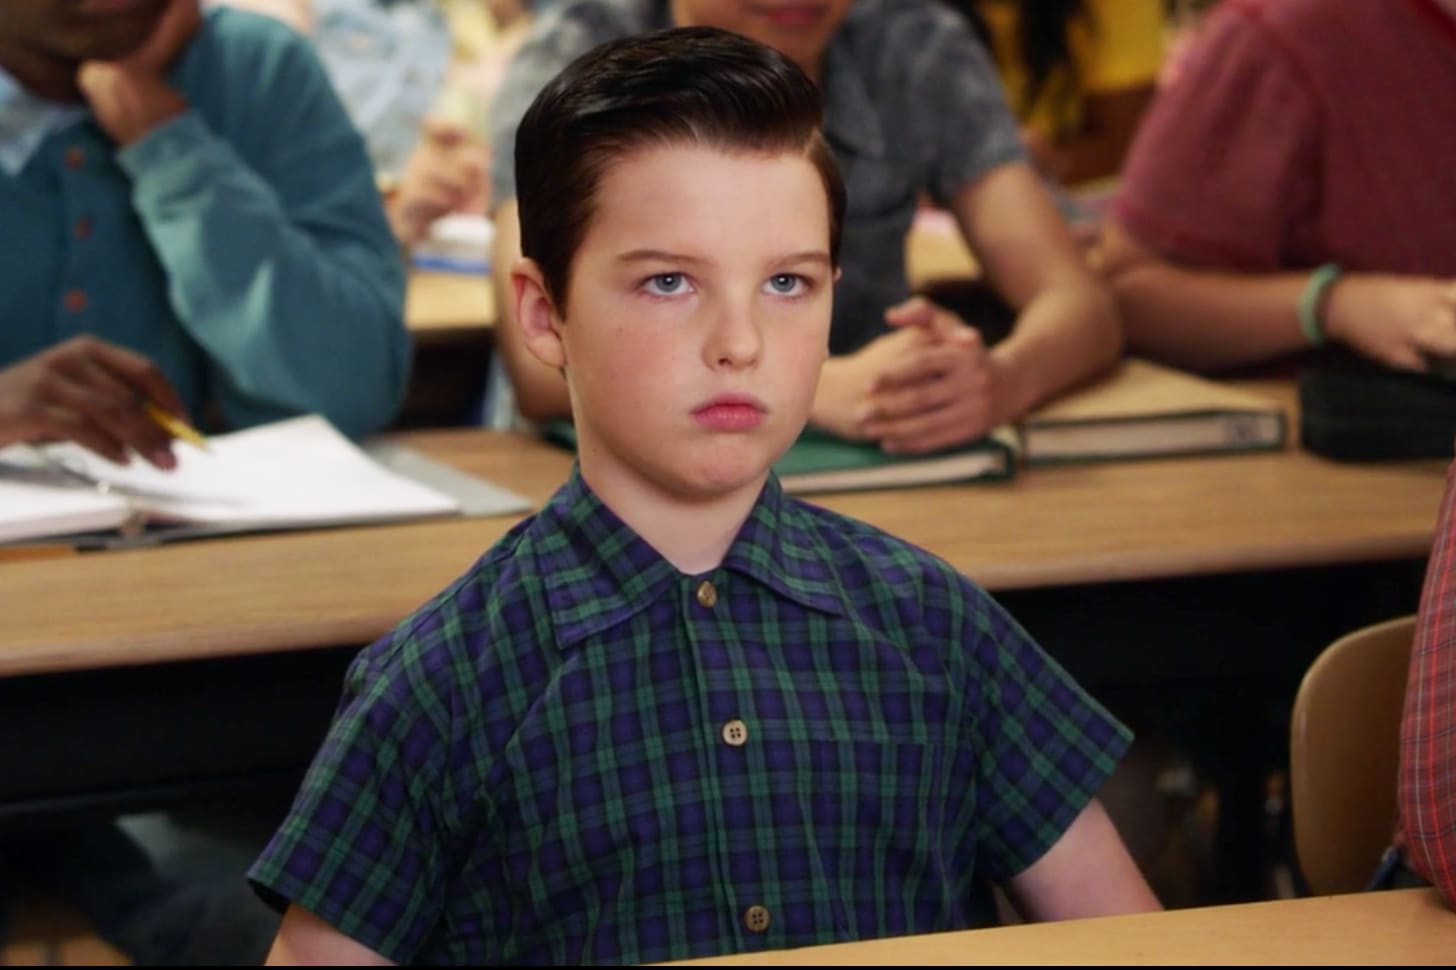 CBS' 'Young Sheldon' faces fine for misuse of emergency alert tone